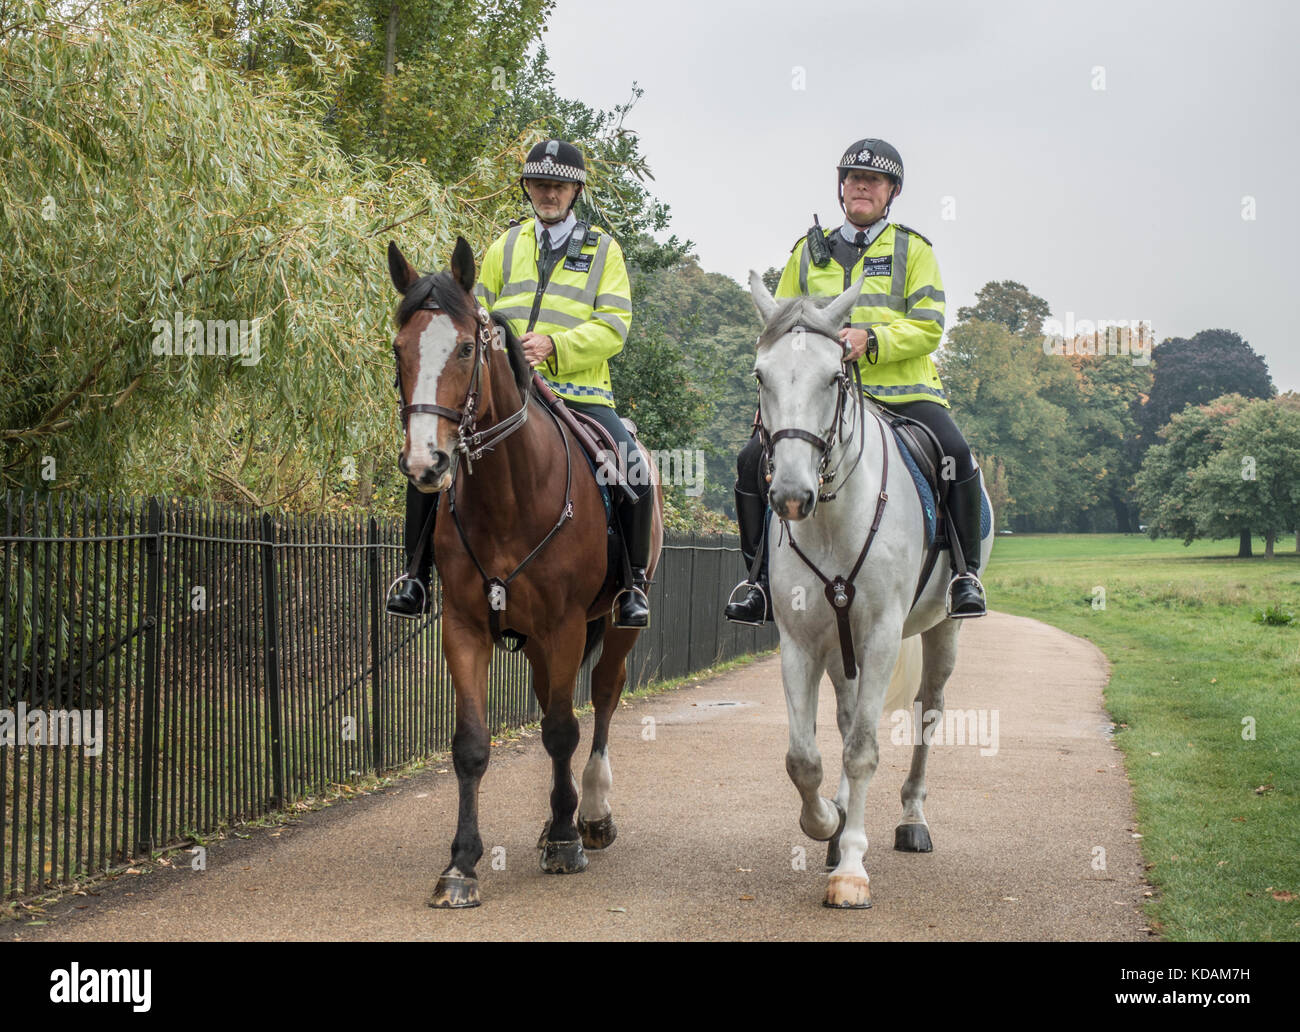 Two middle aged male police officers calmly riding on horseback, on patrol in Kensington Gardens, London W2, England, UK. Stock Photo